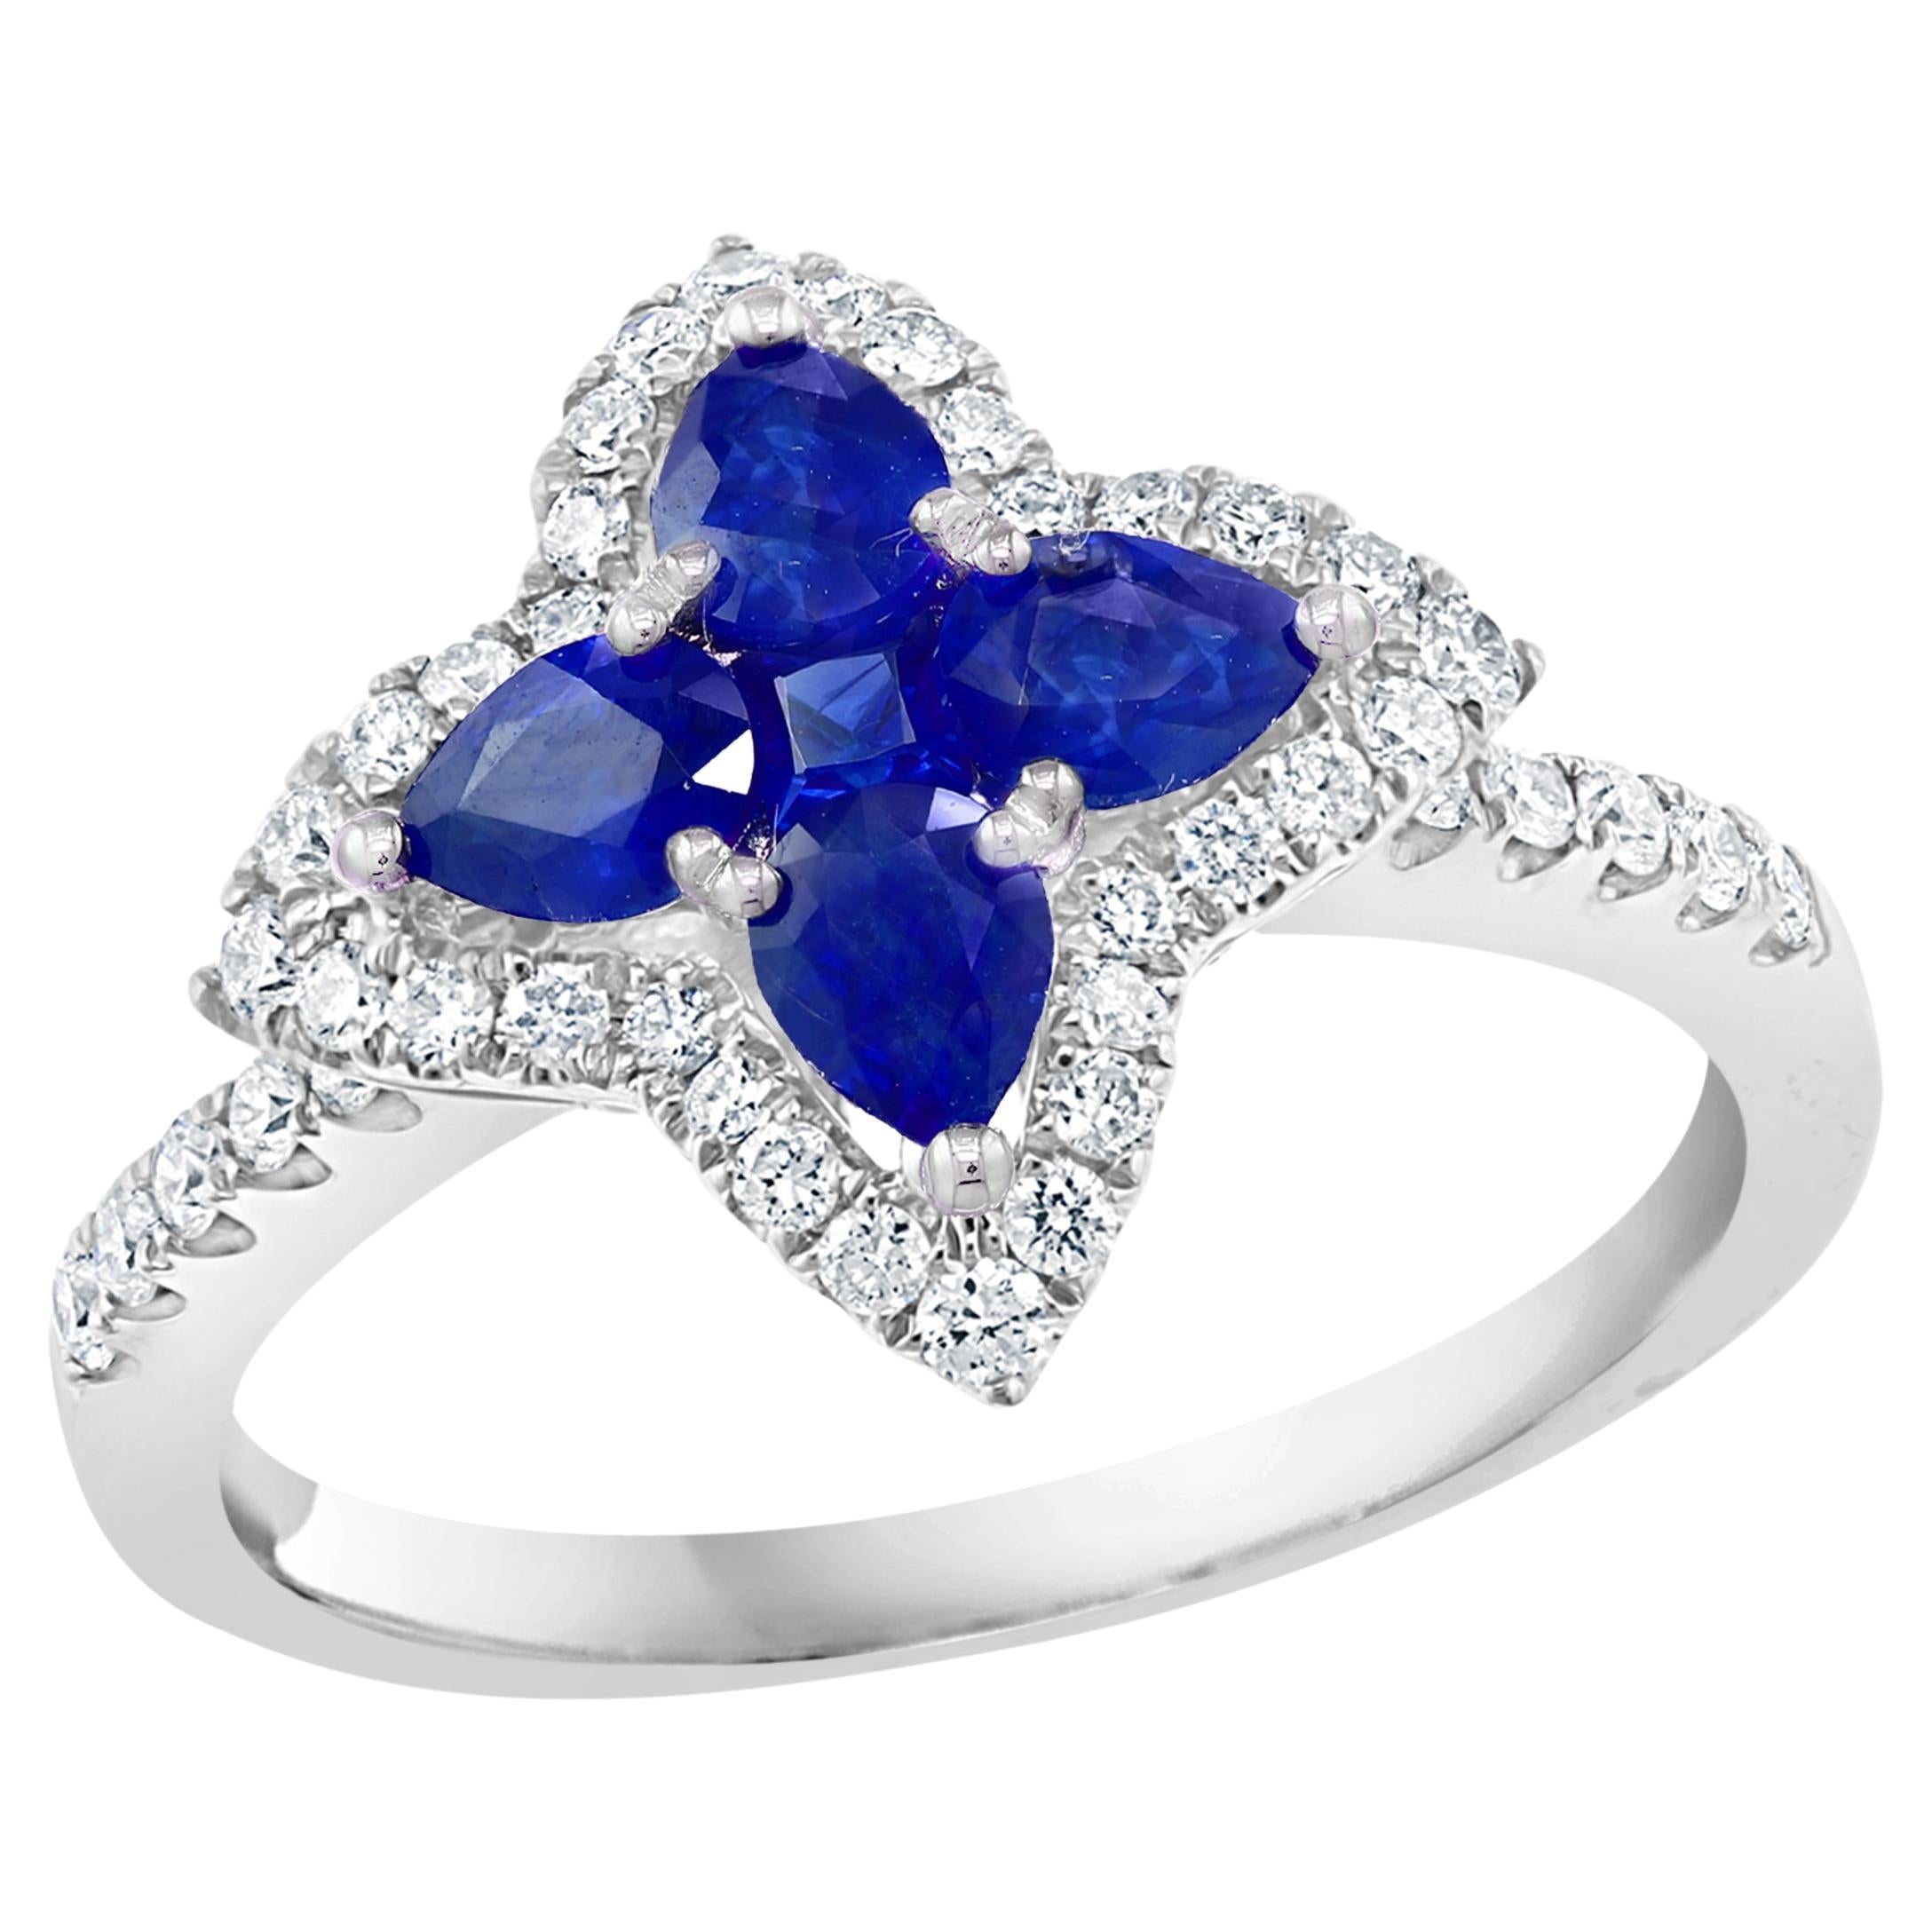 0.70 Carat Pear Shape Sapphire and Diamond Cocktail Ring in 18K White Gold